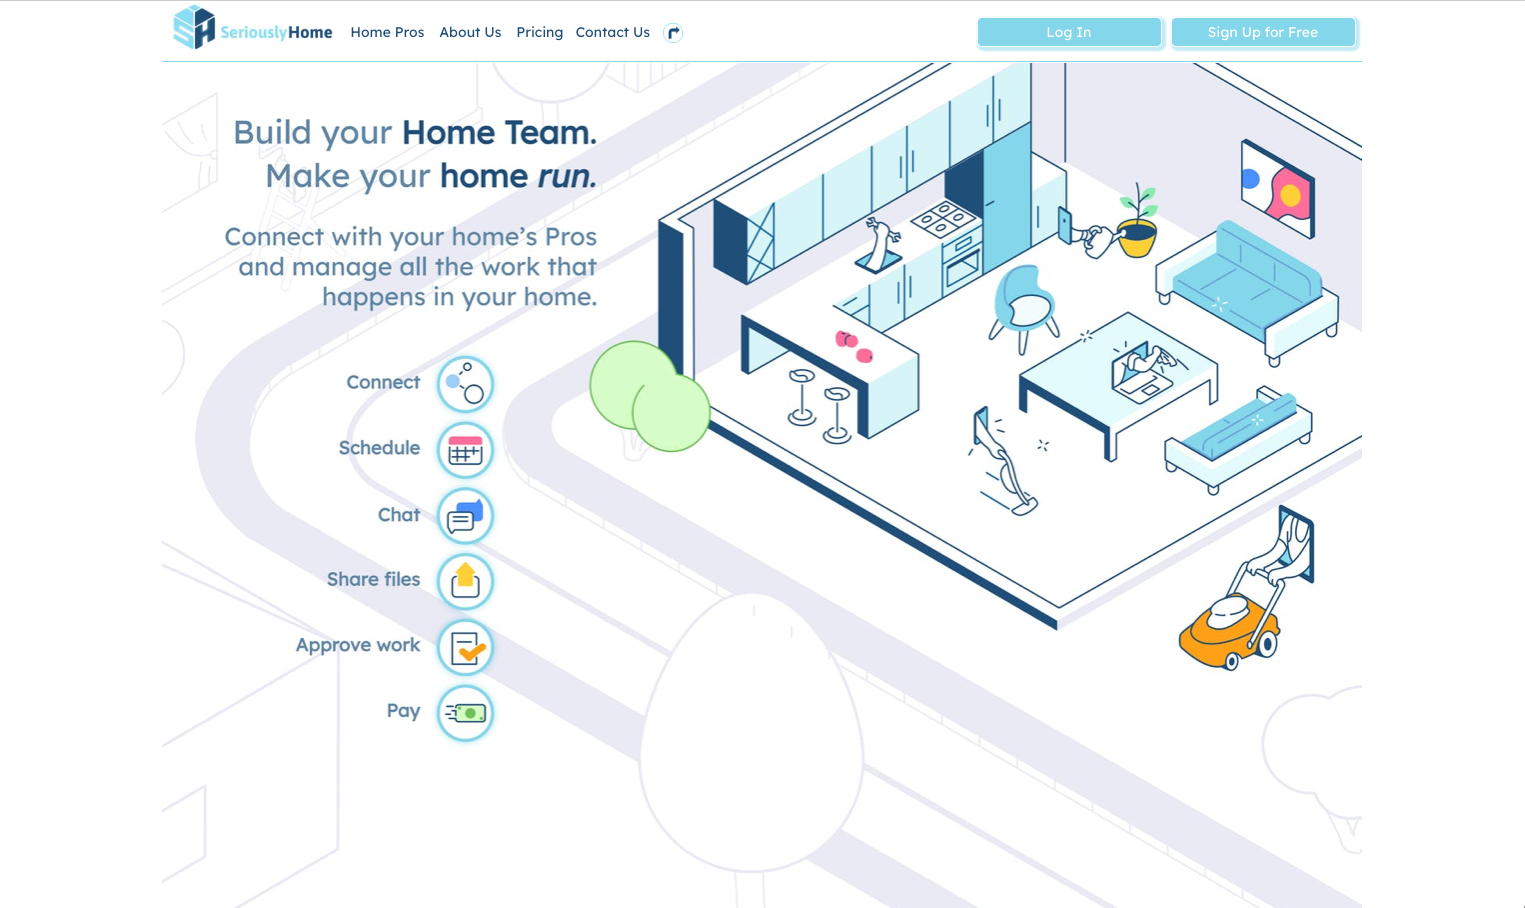 Bubble App of the Day: Seriously Home